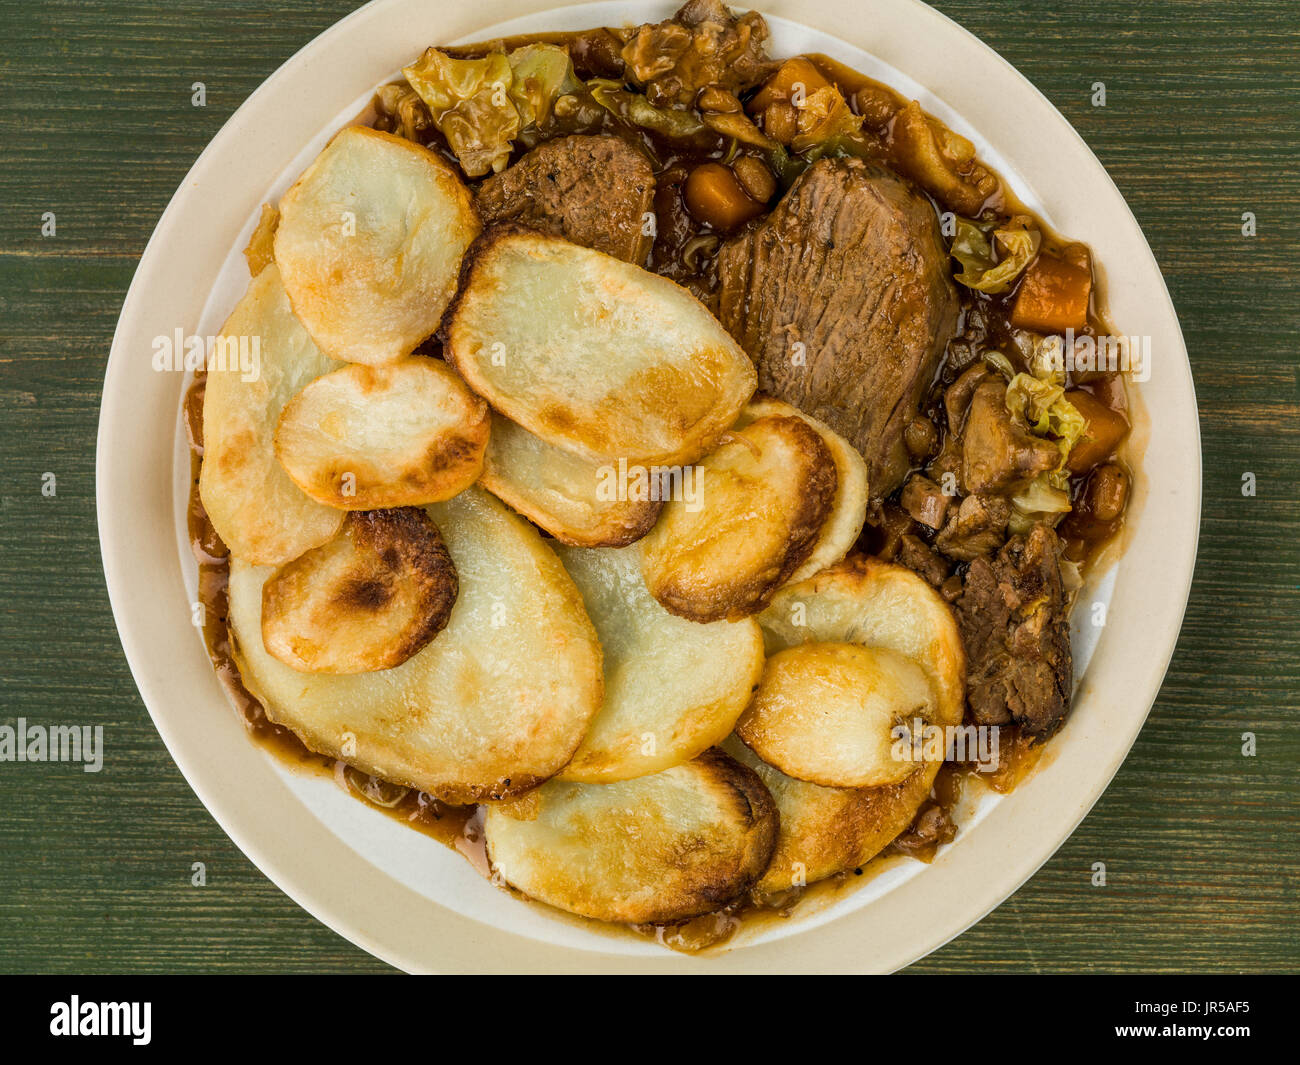 Lamb Hotpot With Sliced Potatoes and Onion Gravy Against a Green Wooden Background Stock Photo